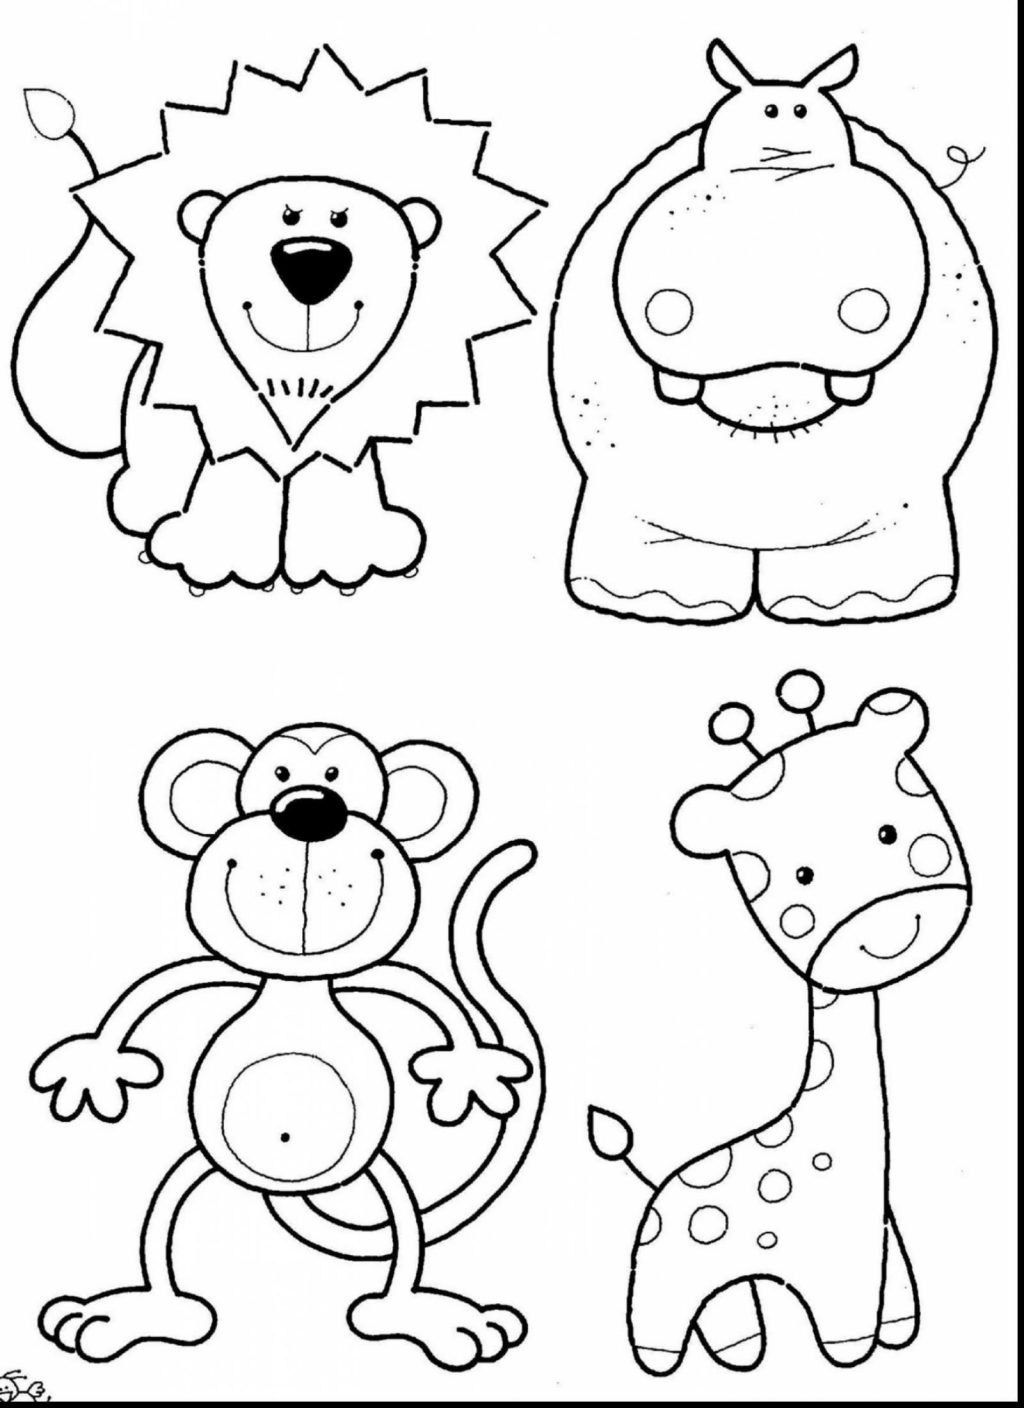 Zoo animals coloring pages coloring pages zoo animals coloring pages through the thousand